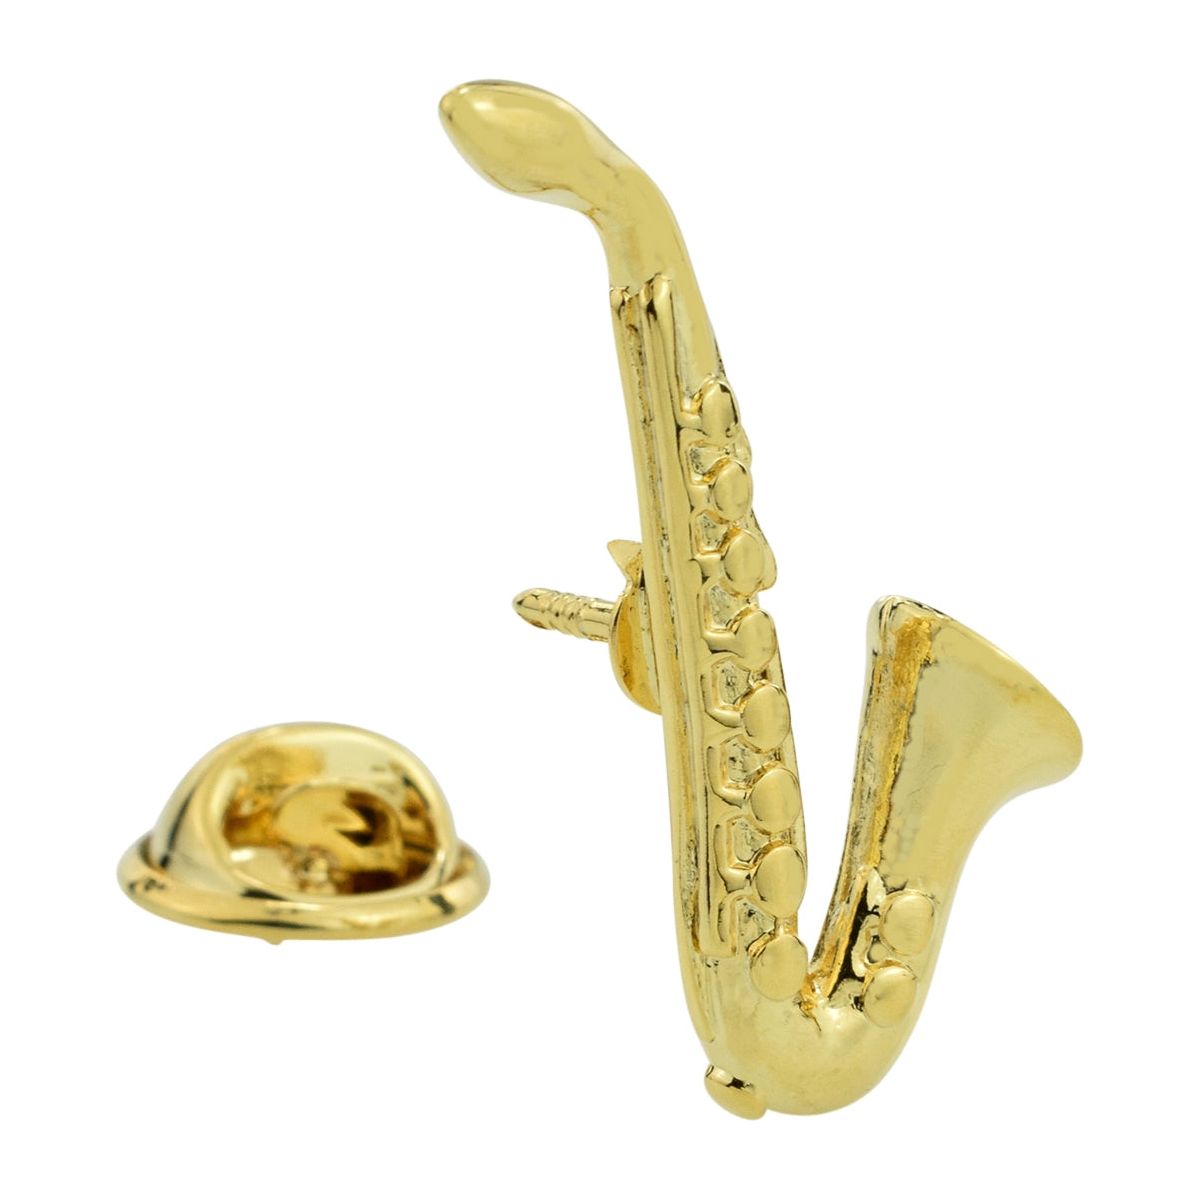 Gold Plated Saxophone Lapel Pin Badge - Ashton and Finch